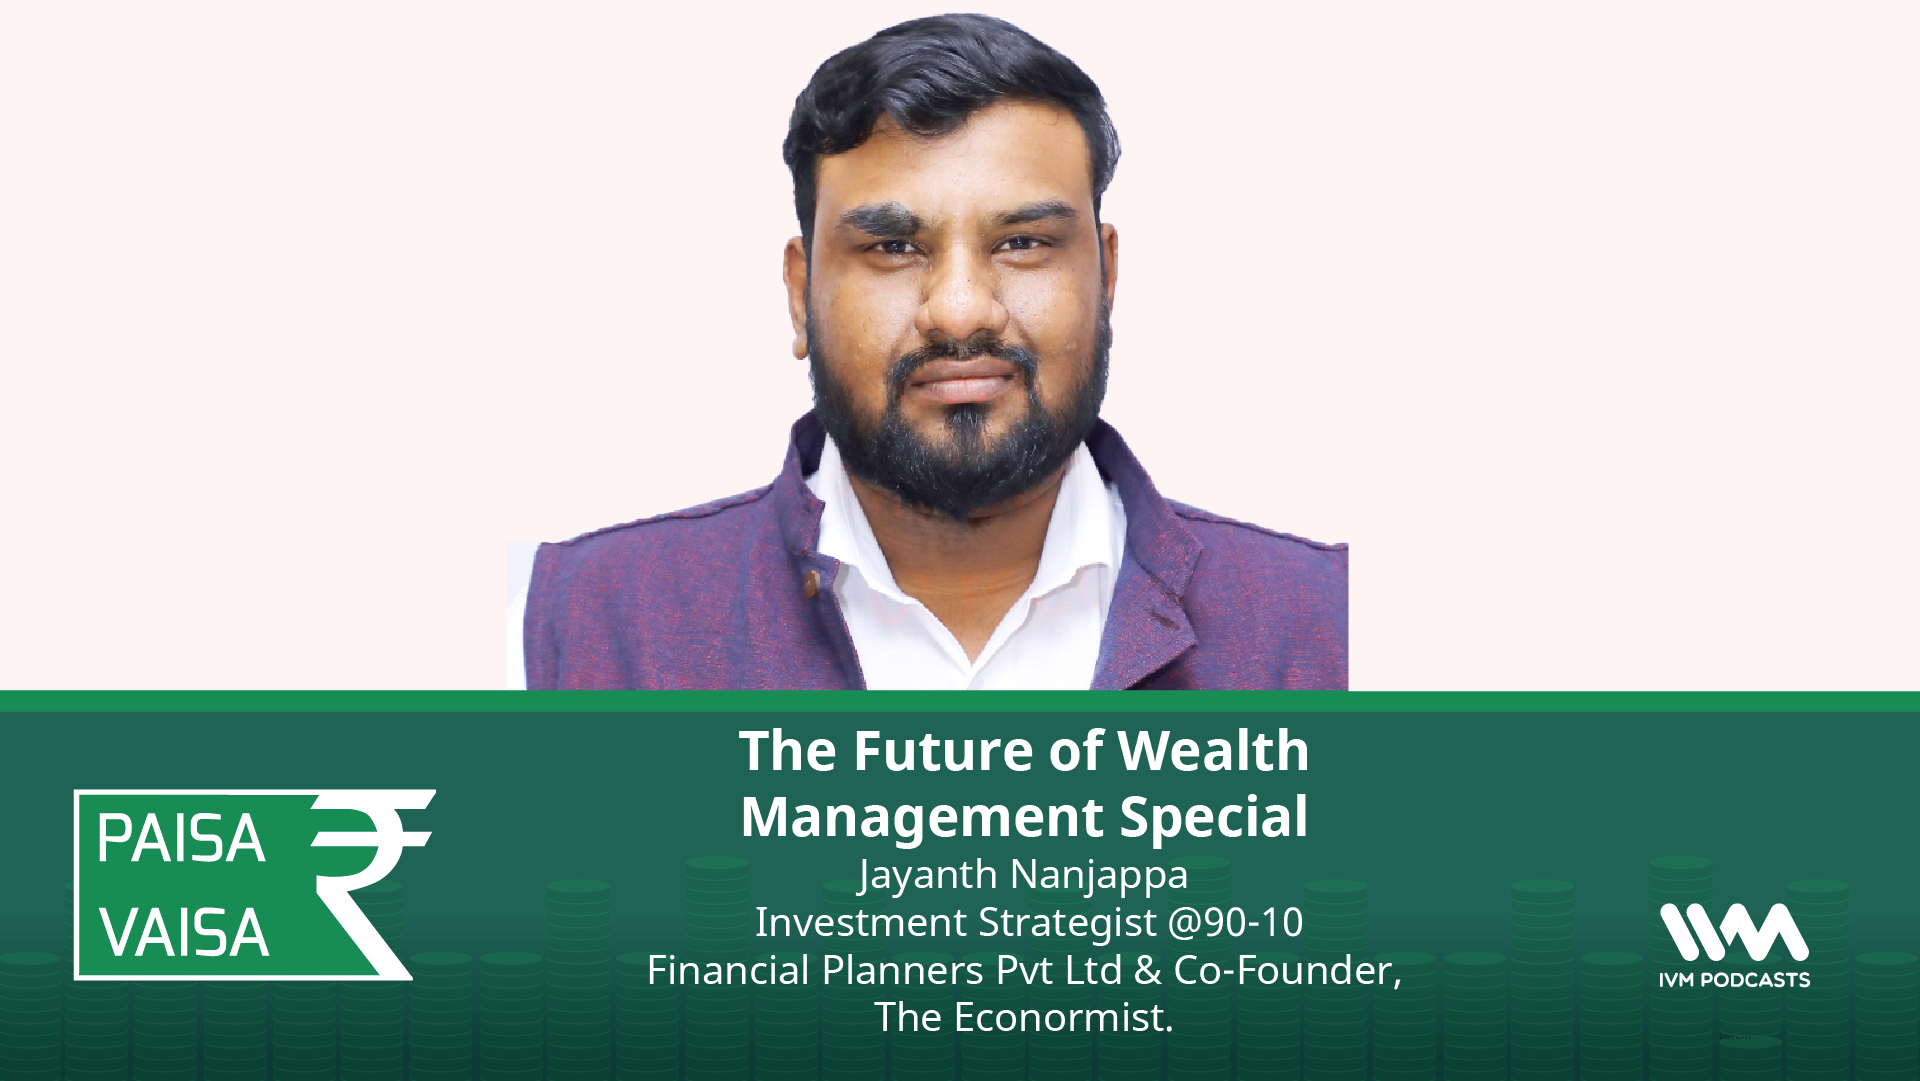 The Future of Wealth Management Special